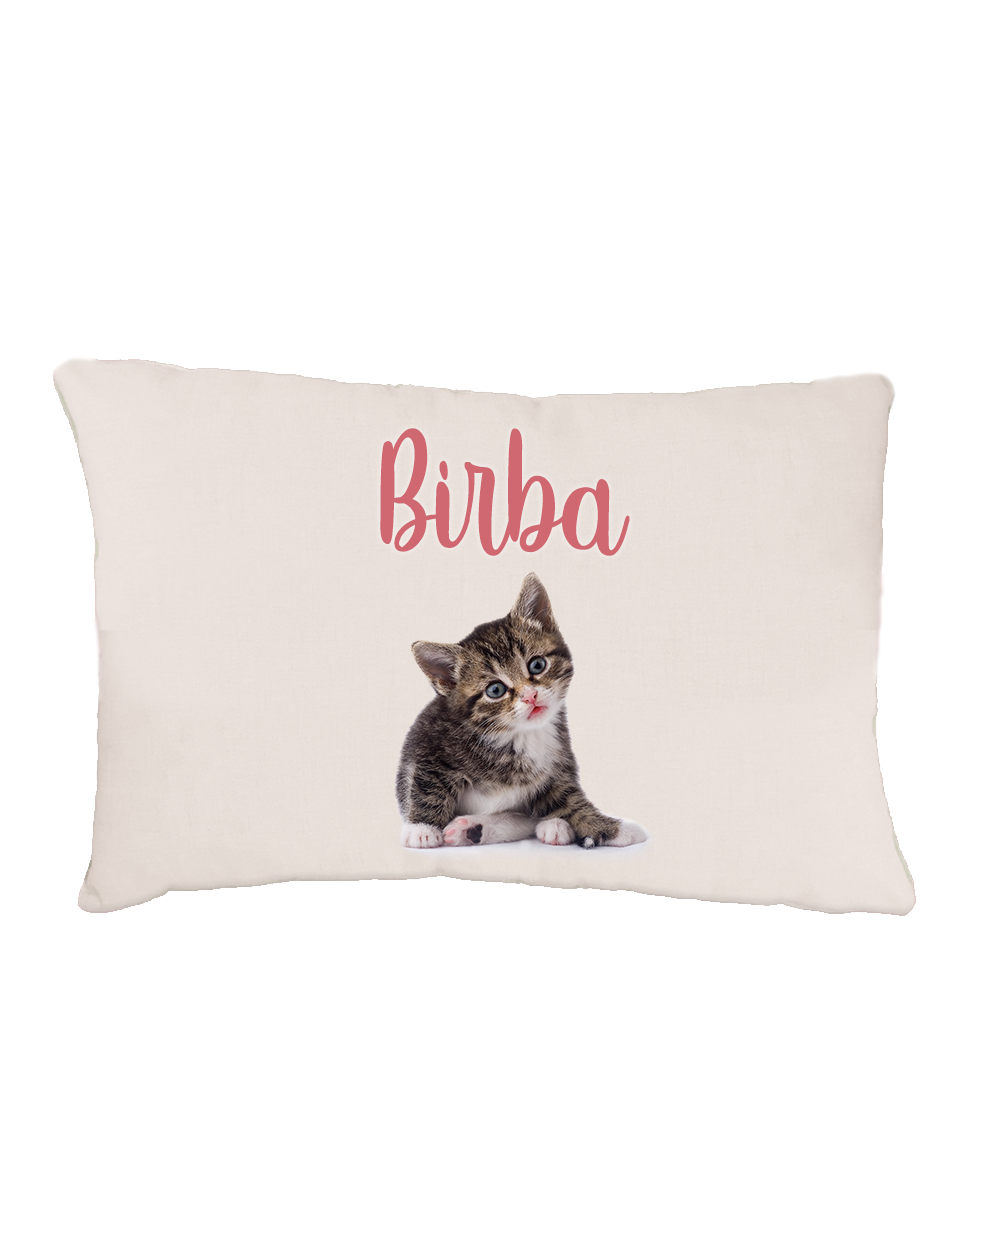 Personalized soft cat bed